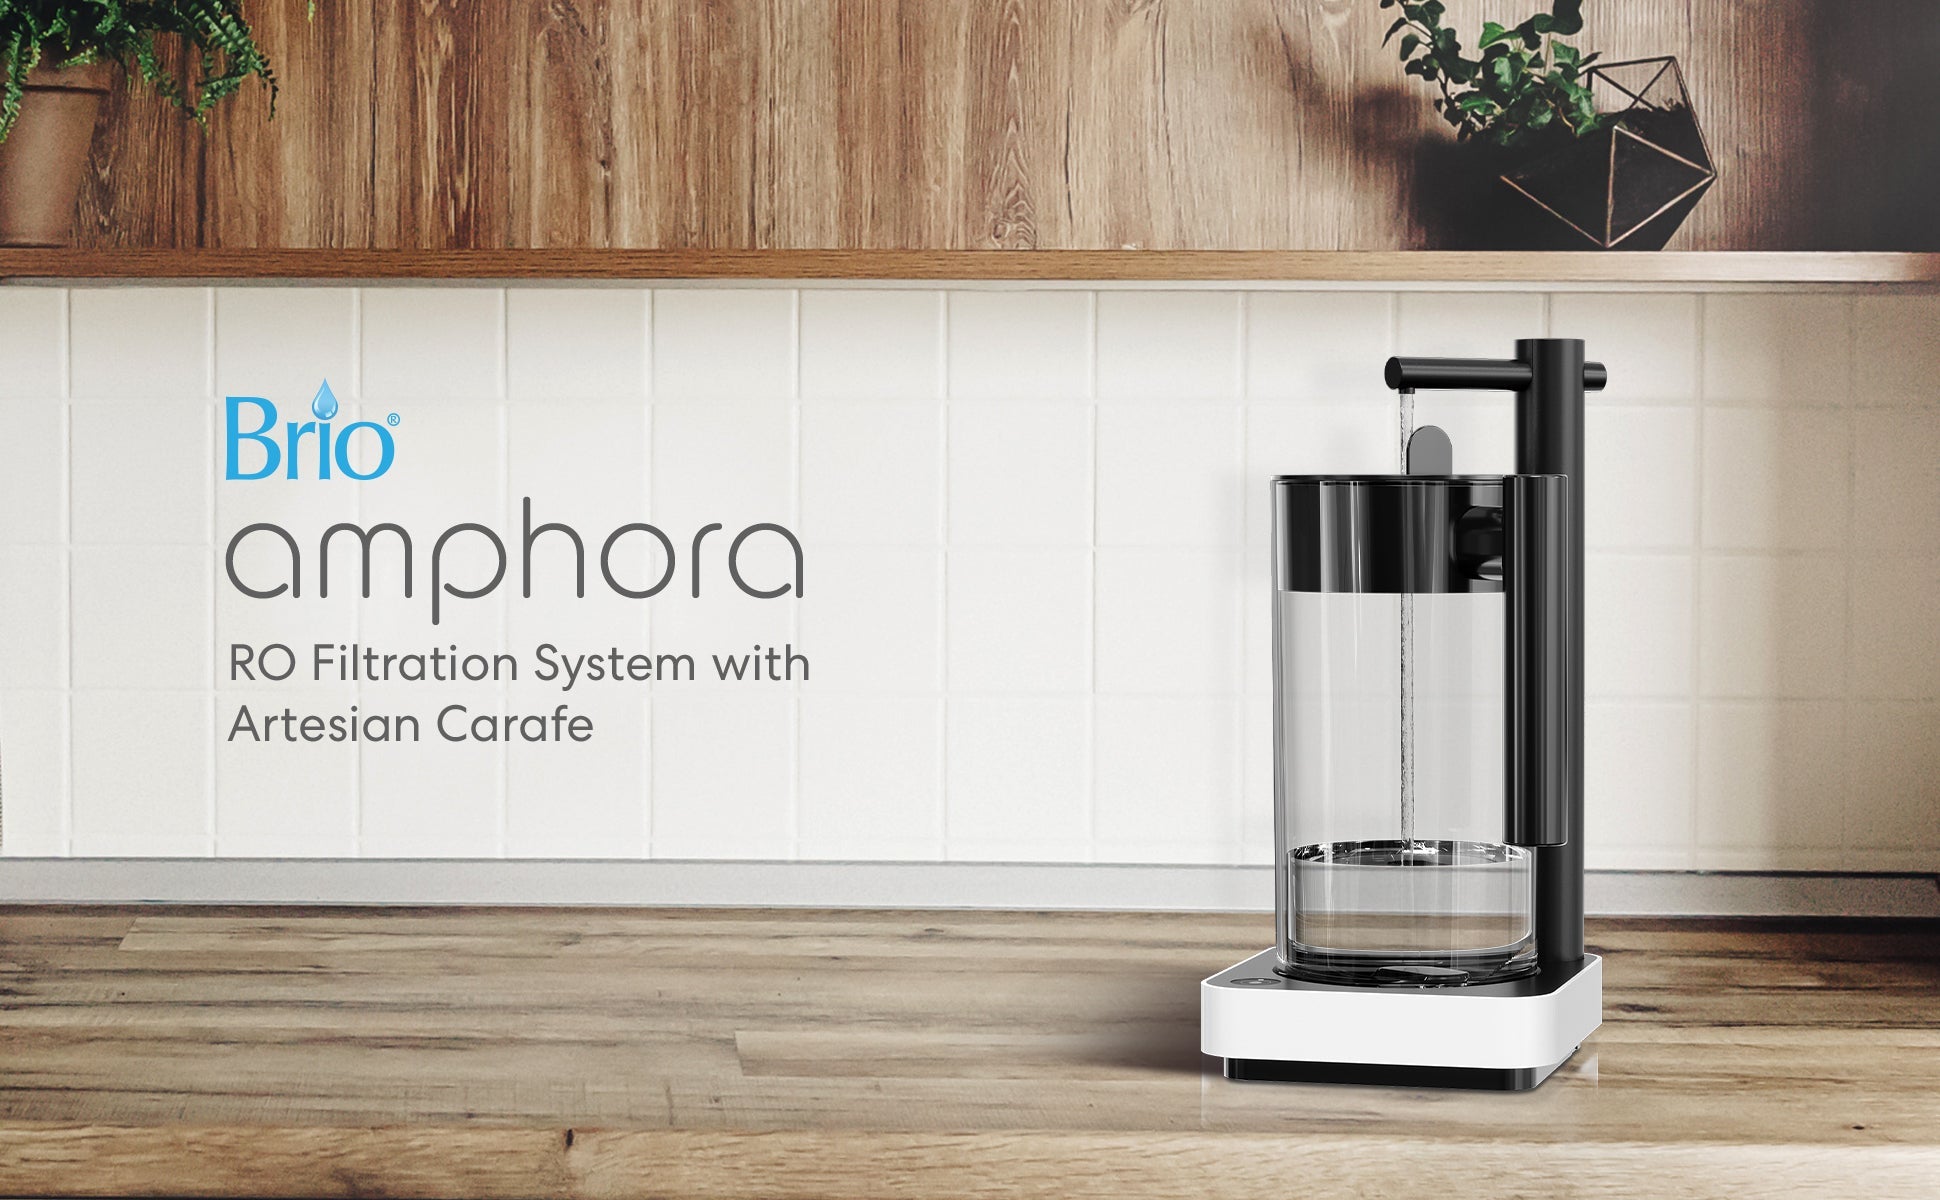 Still Waiting for Your Water Filter Pitcher to Fill? The Wait Is Over.